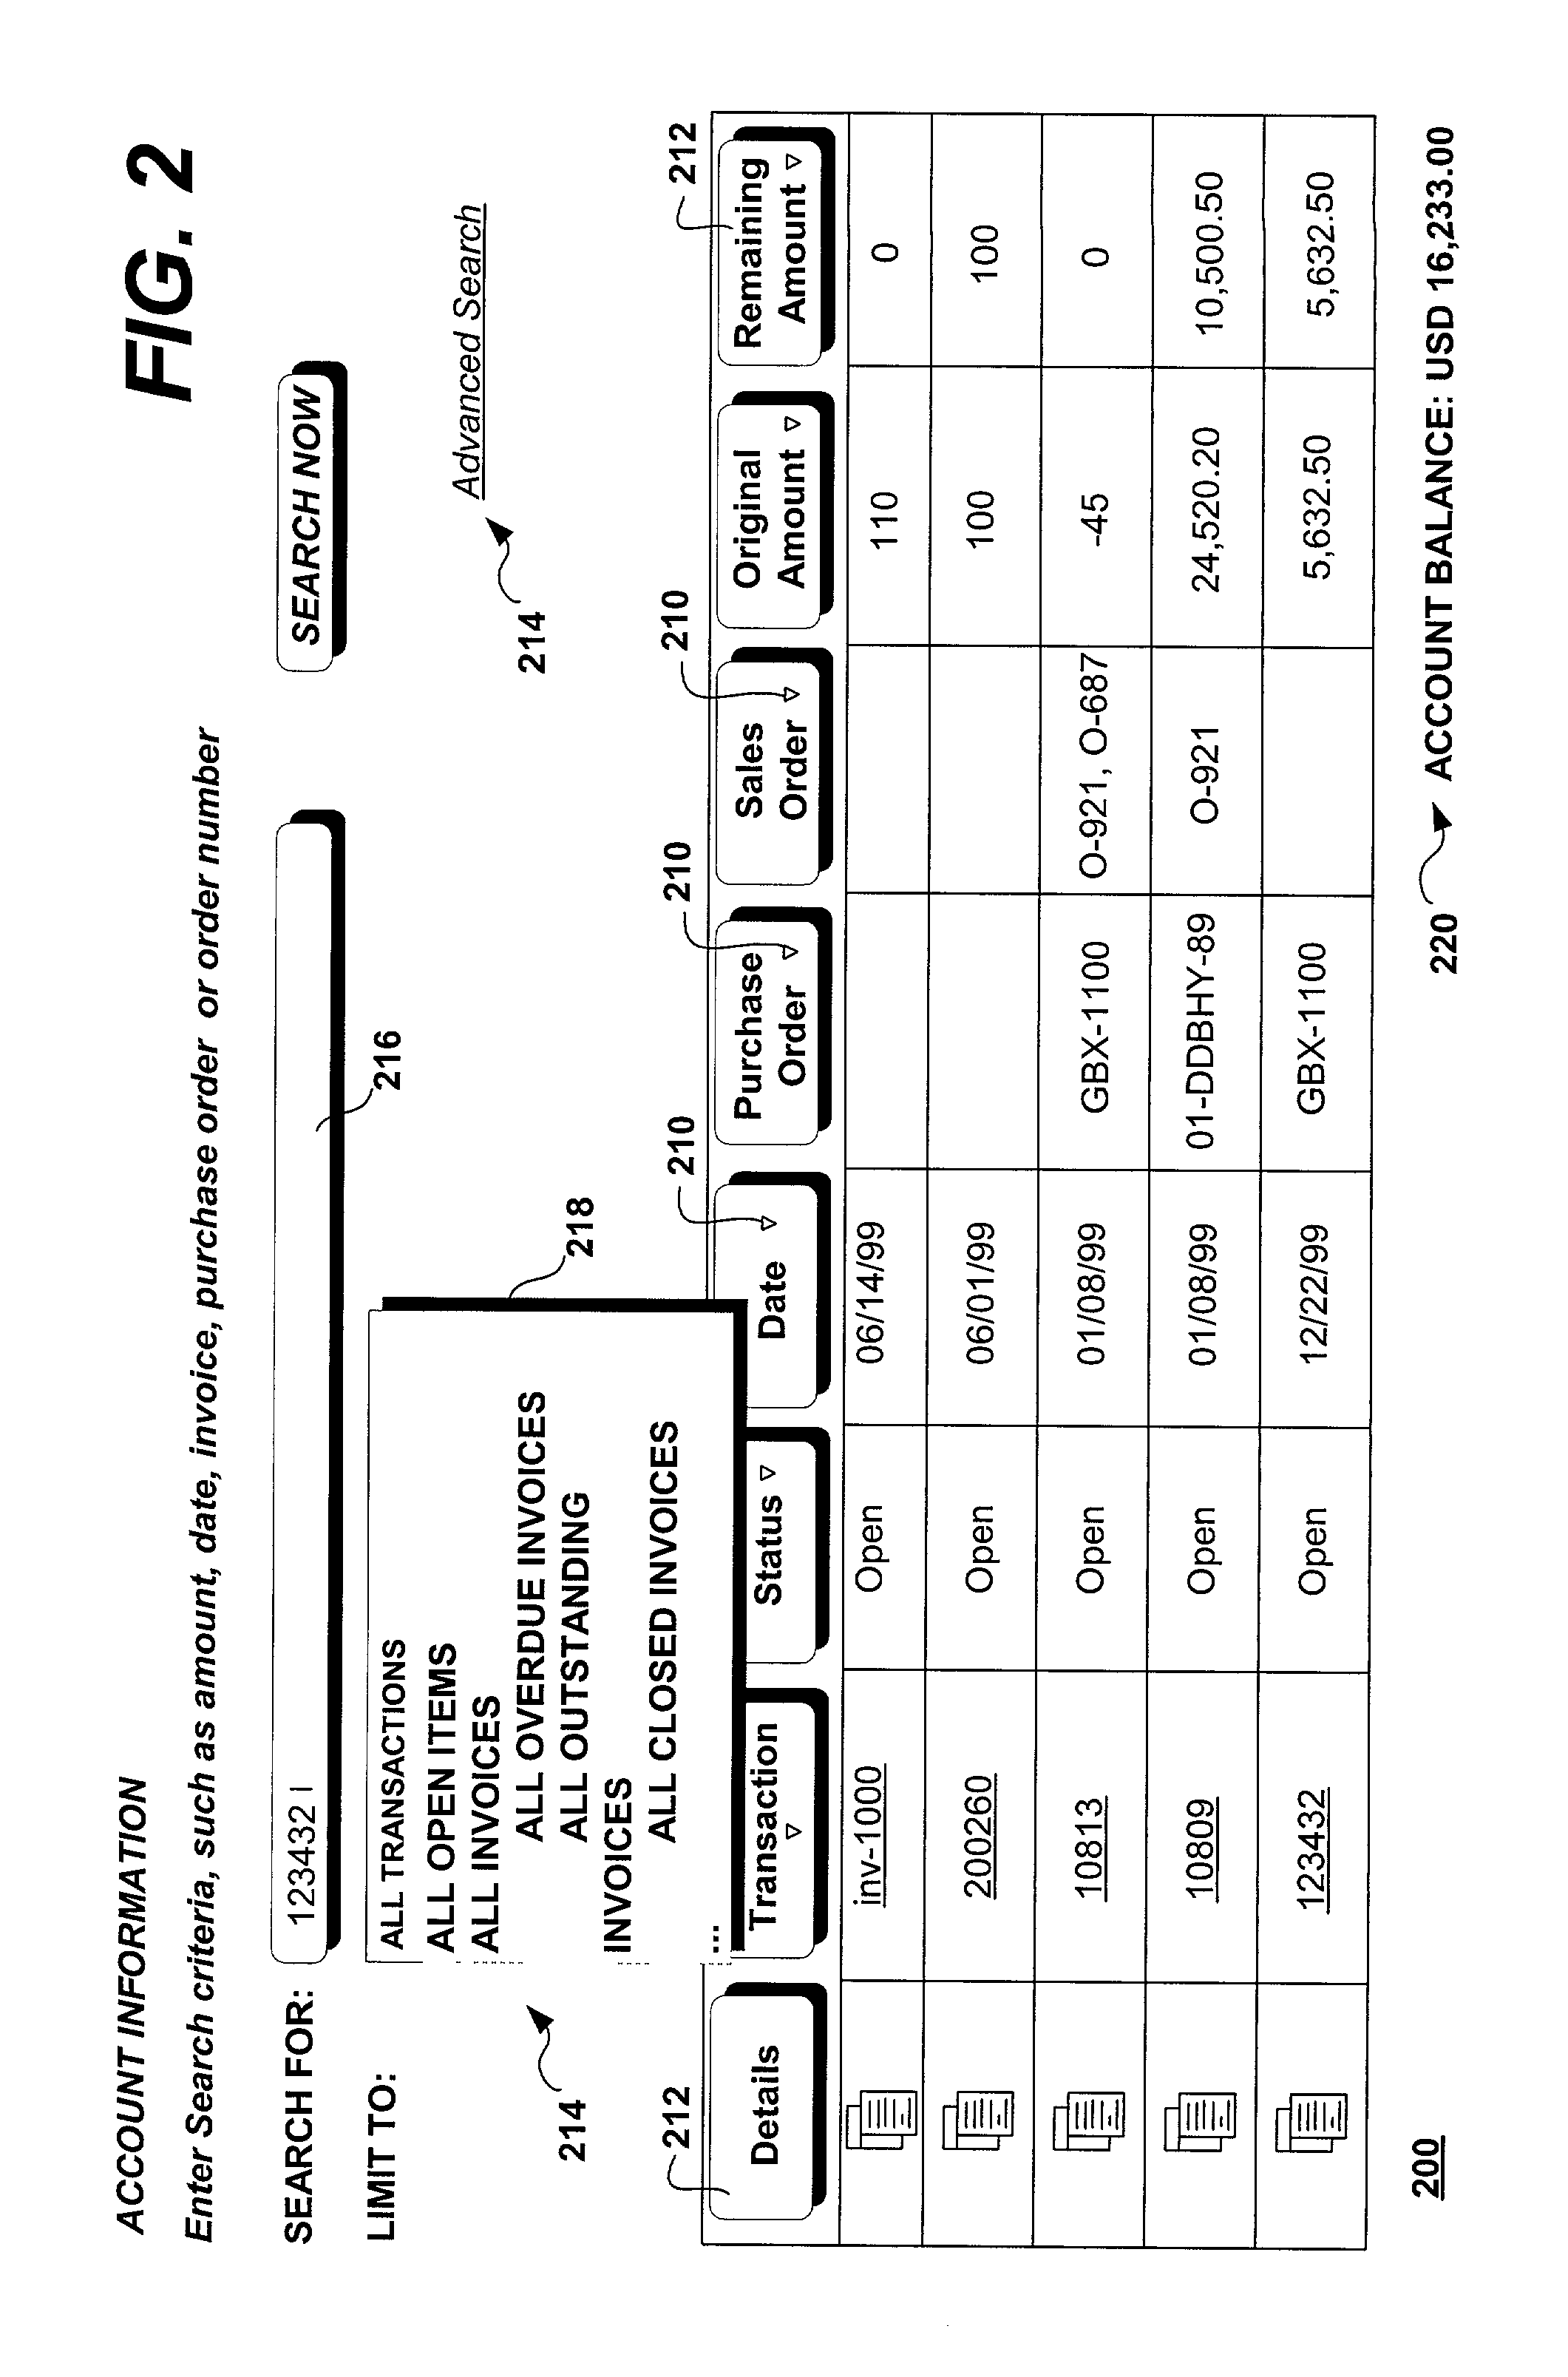 Methods and systems for online self-service receivables management and automated online receivables dispute resolution